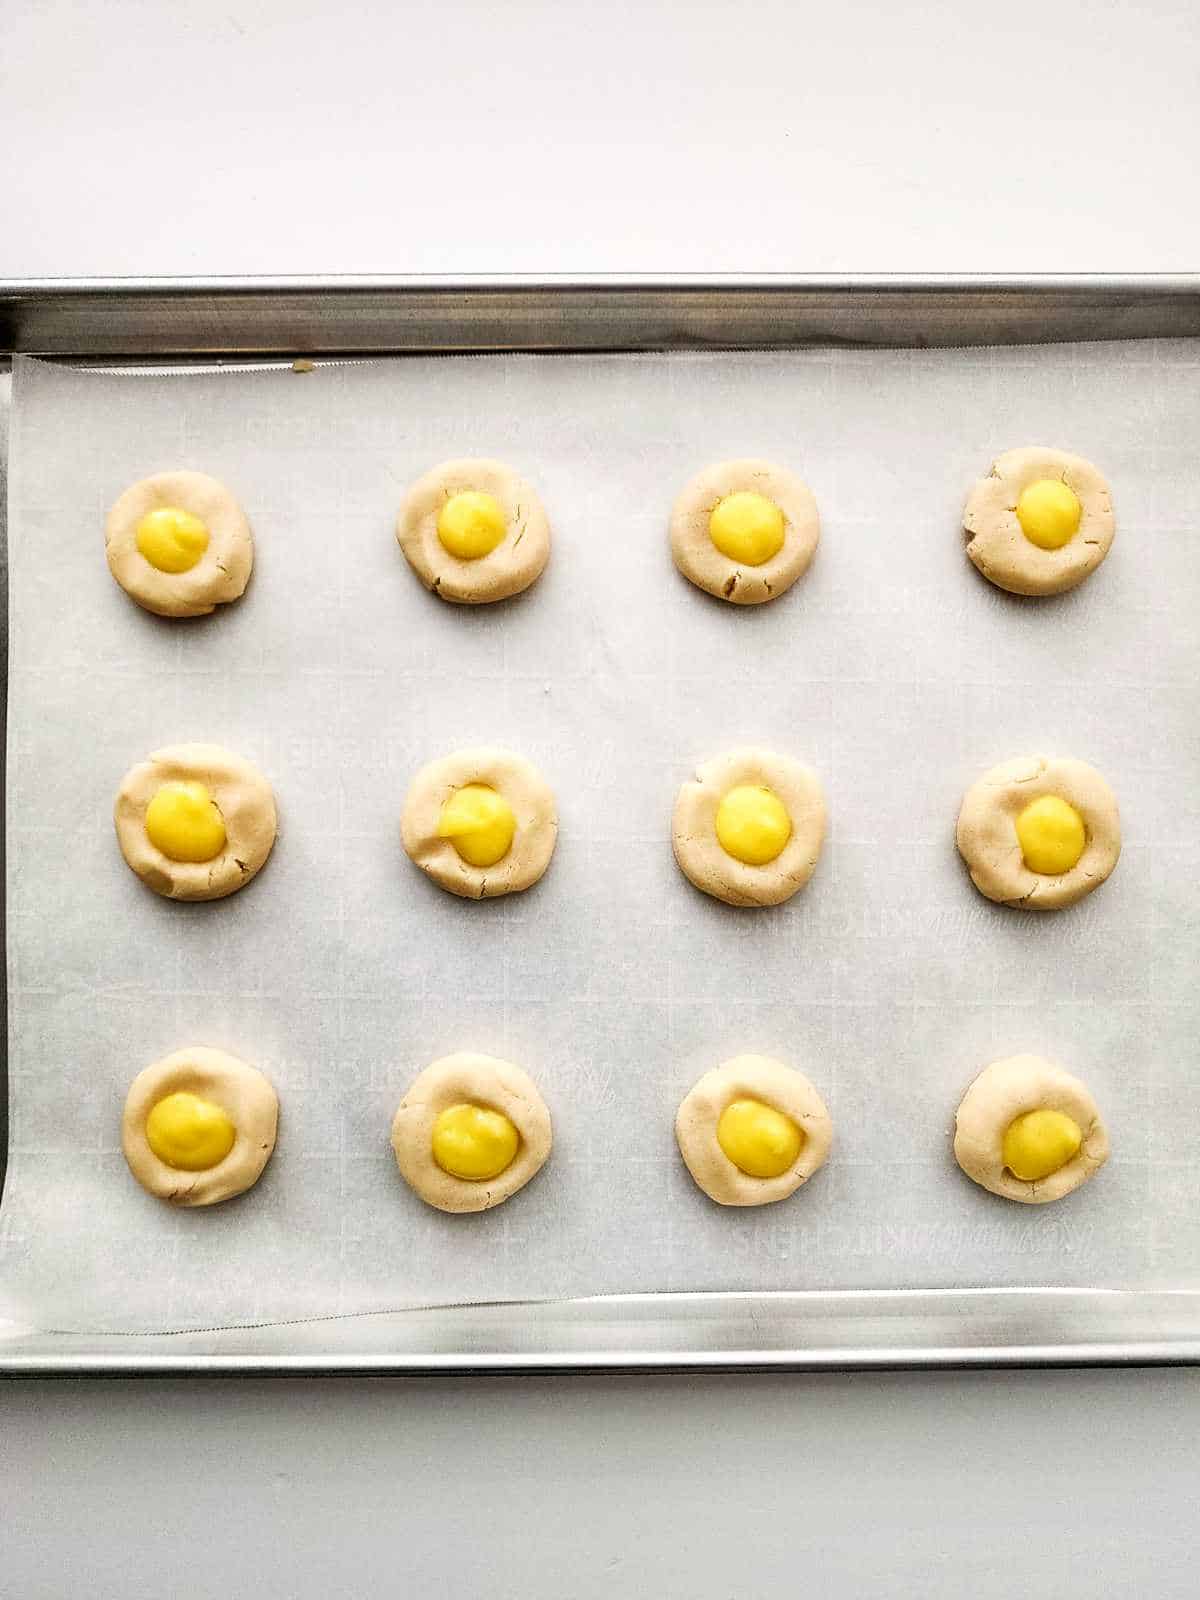 piped lemon curd in the indentation of each cookie on a cookie sheet.